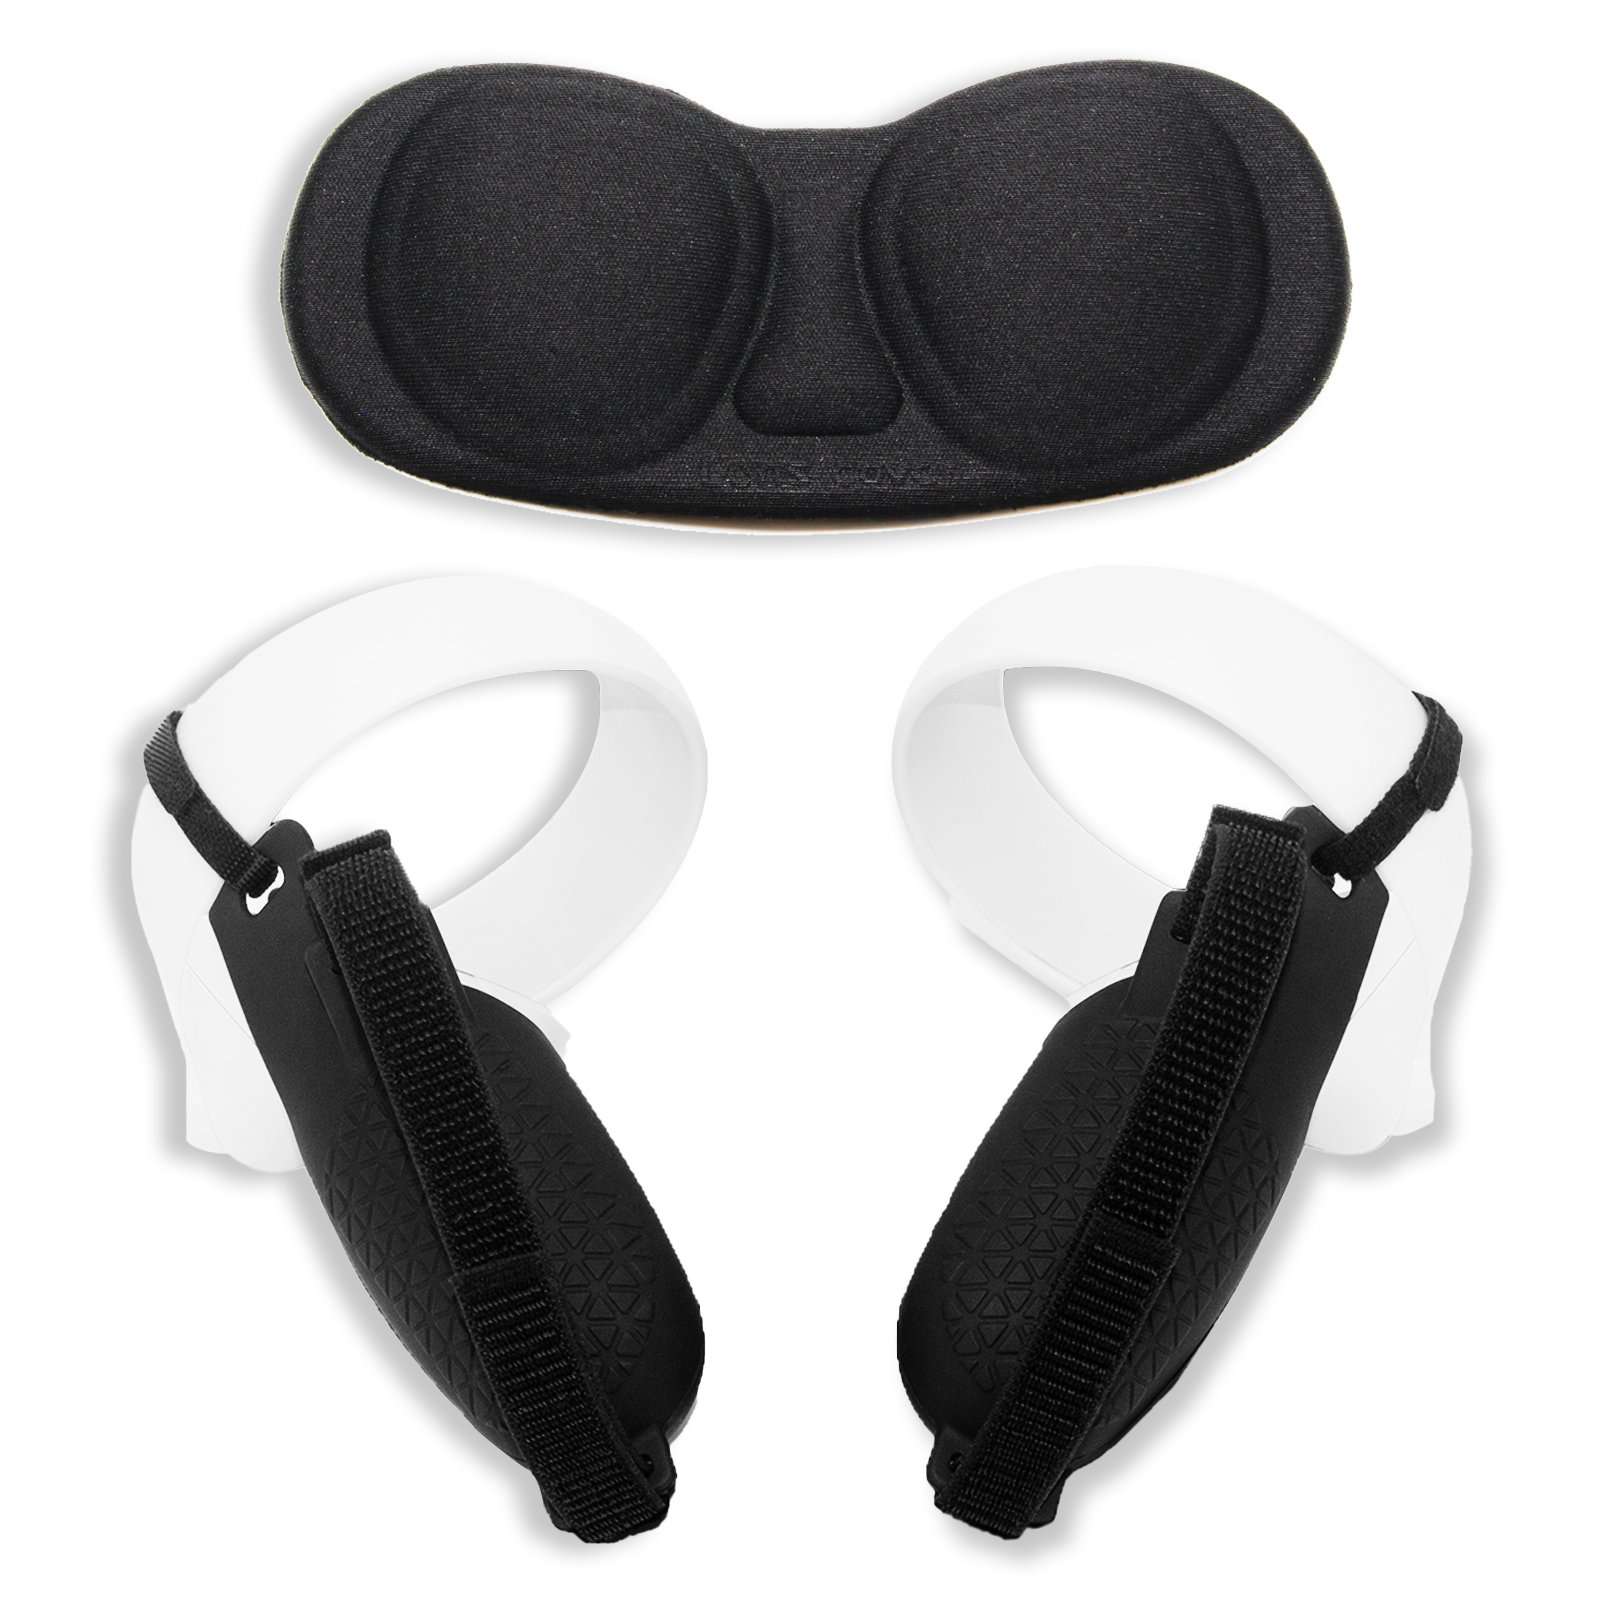 VR controller silicone protective cover and VR headset eye mask.